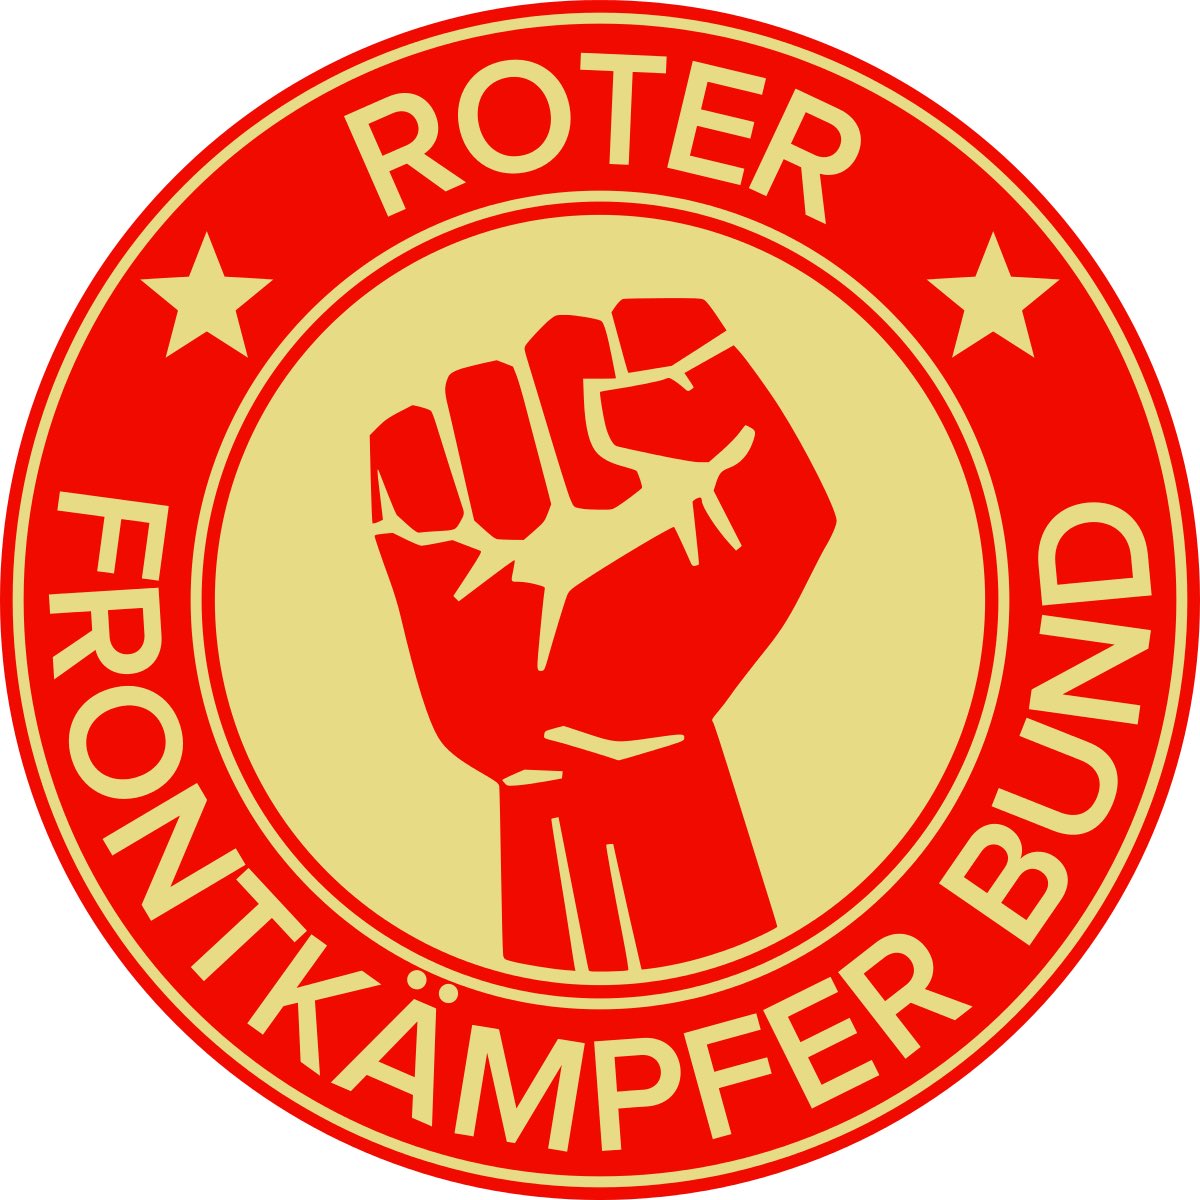 March 1, 1926, the raised clenched fist received official patent protection from the State Patent Office in Germany, for use as the trademark of the Roter Frontkämpferbund (RFD), a paramilitary organization under the leadership of the Communist Party of Germany